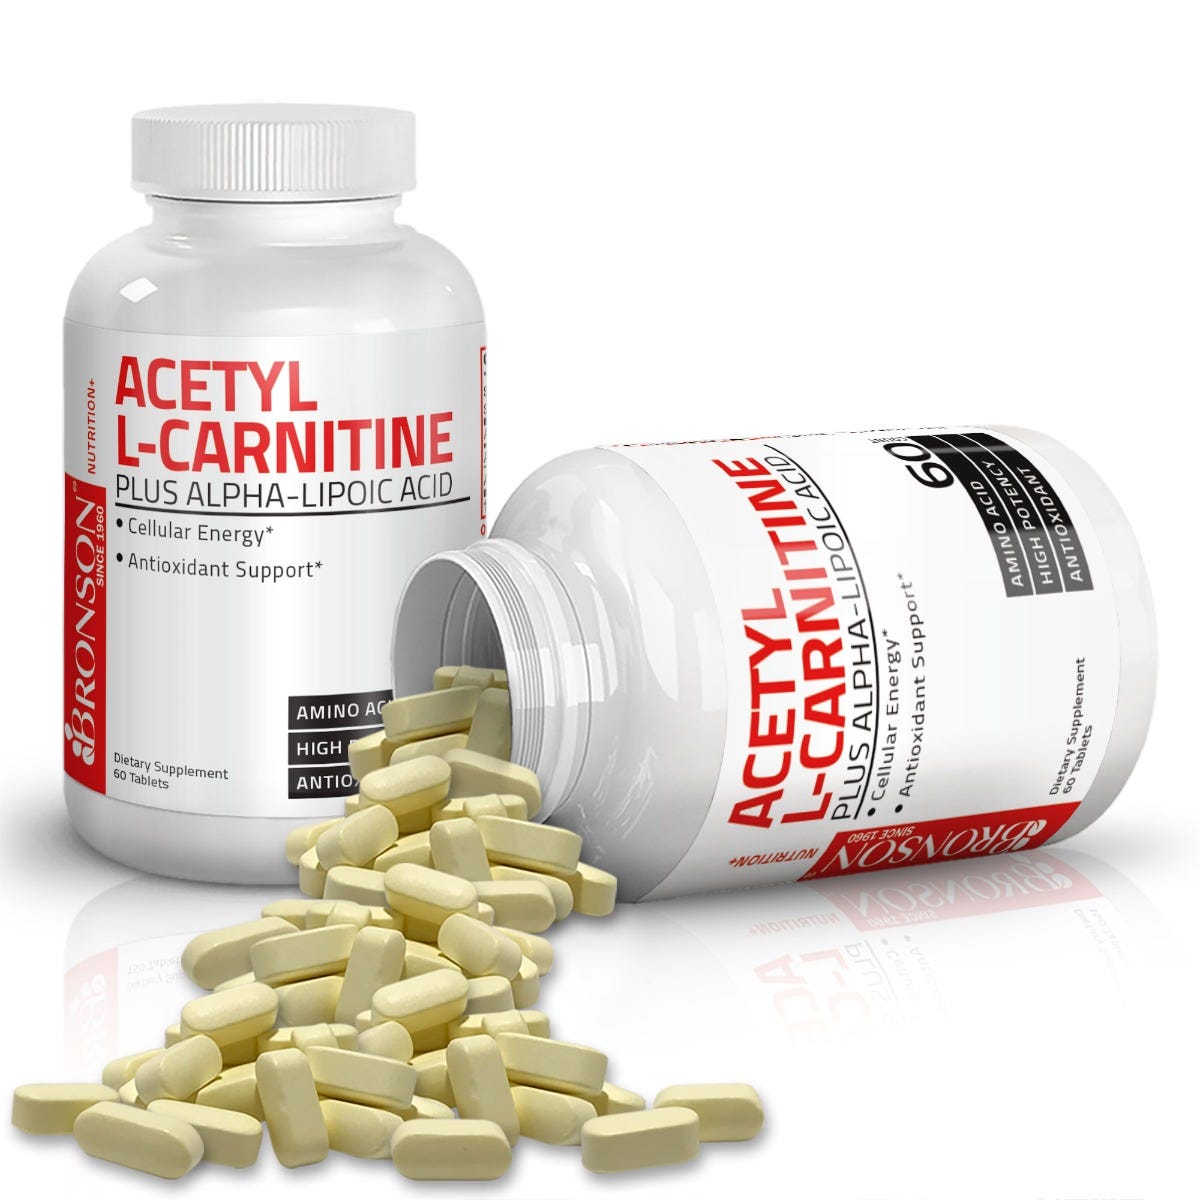 Acetyl L-Carnitine with Alpha-Lipoic Acid view 4 of 6